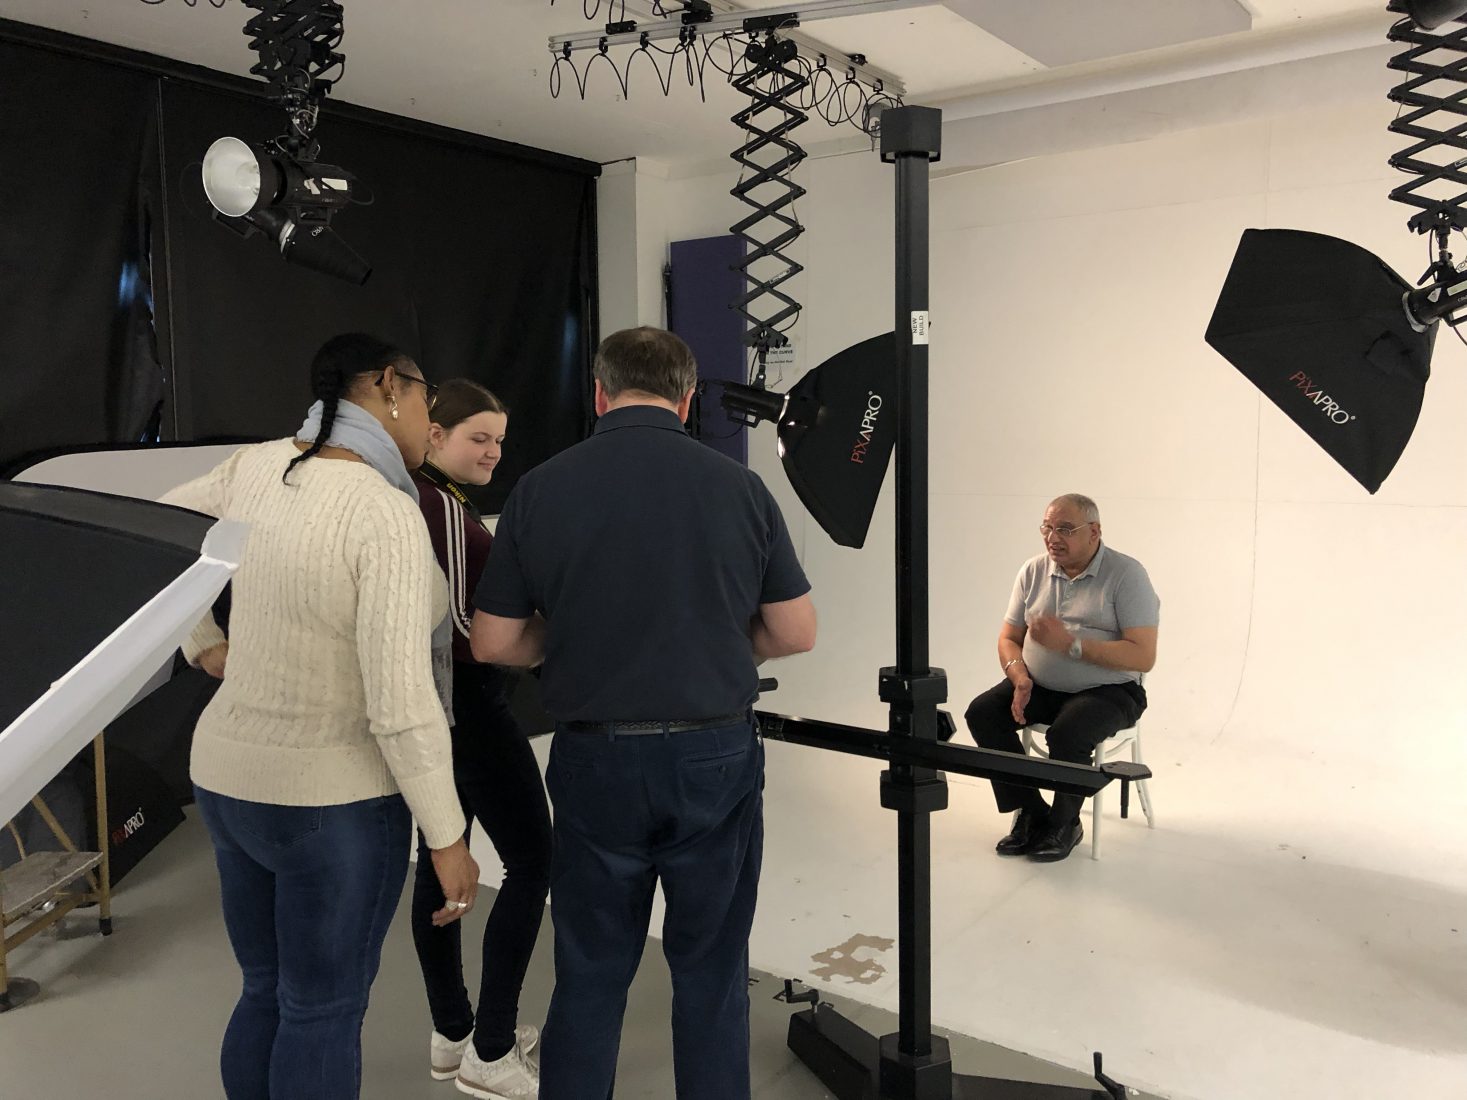 A man sits in a white studio which is lit up by lights. Three people, two women and a man are grouped together as if preparing to photograph the man.